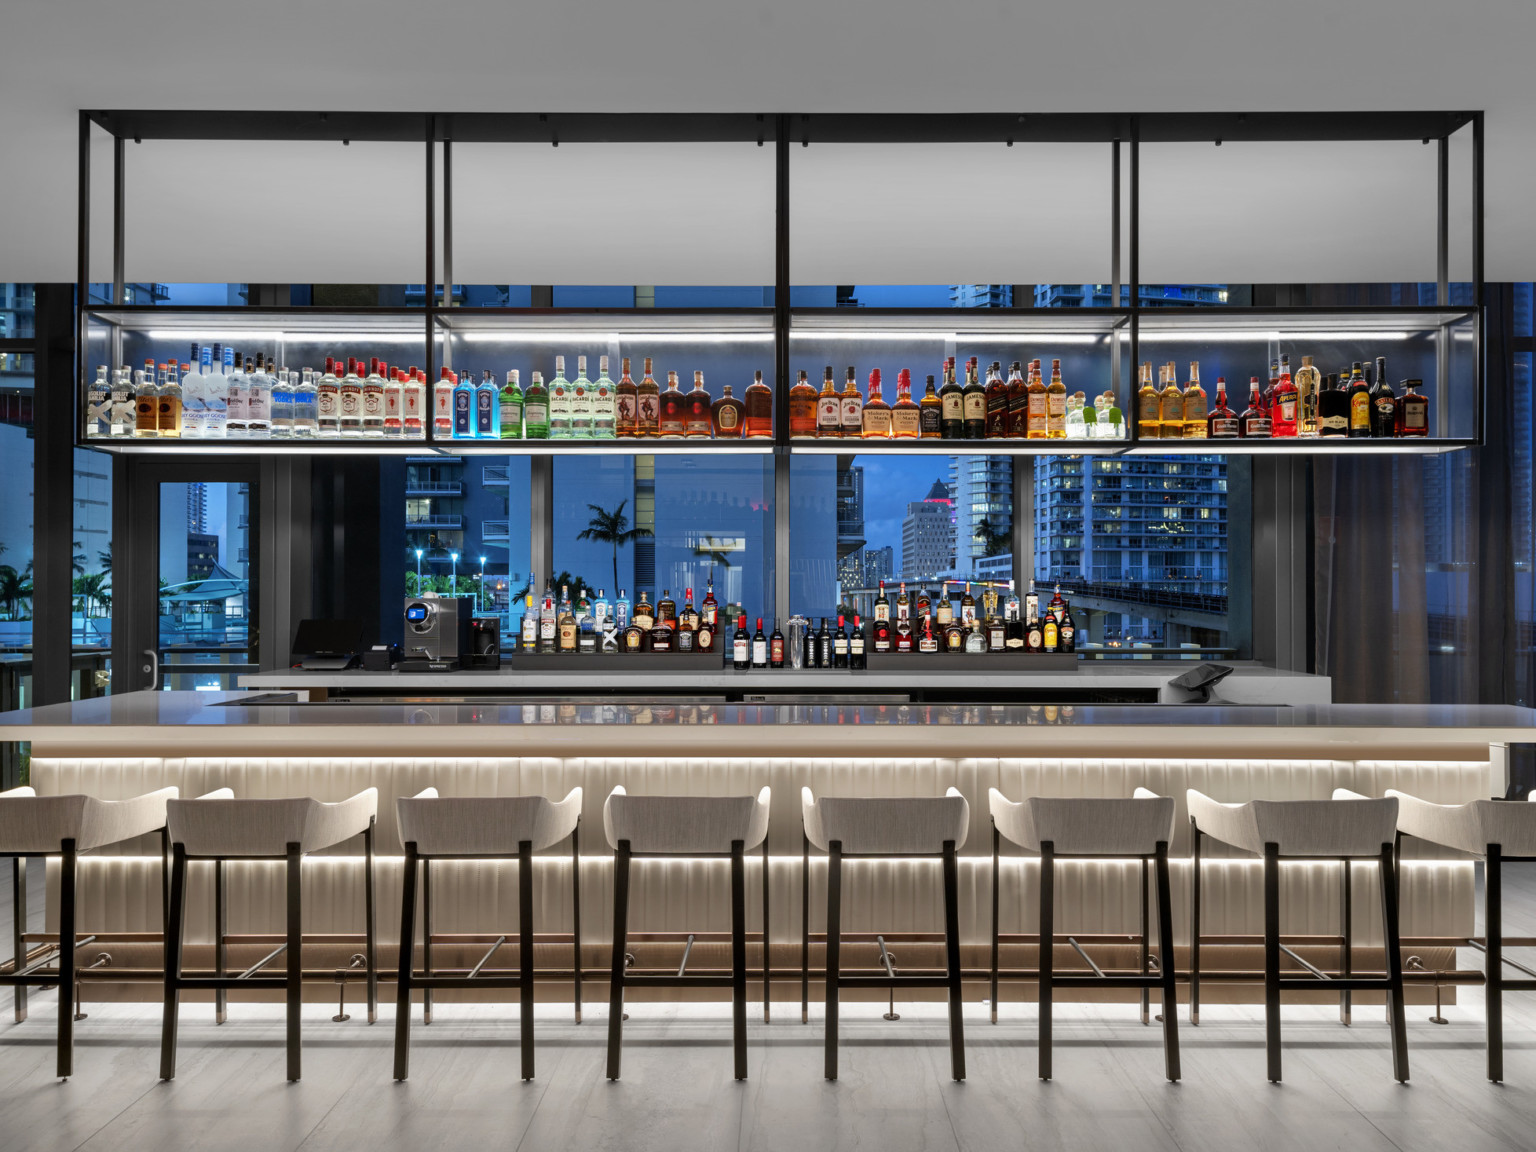 The bar is illuminated like a piece of art enclosed by the night sky